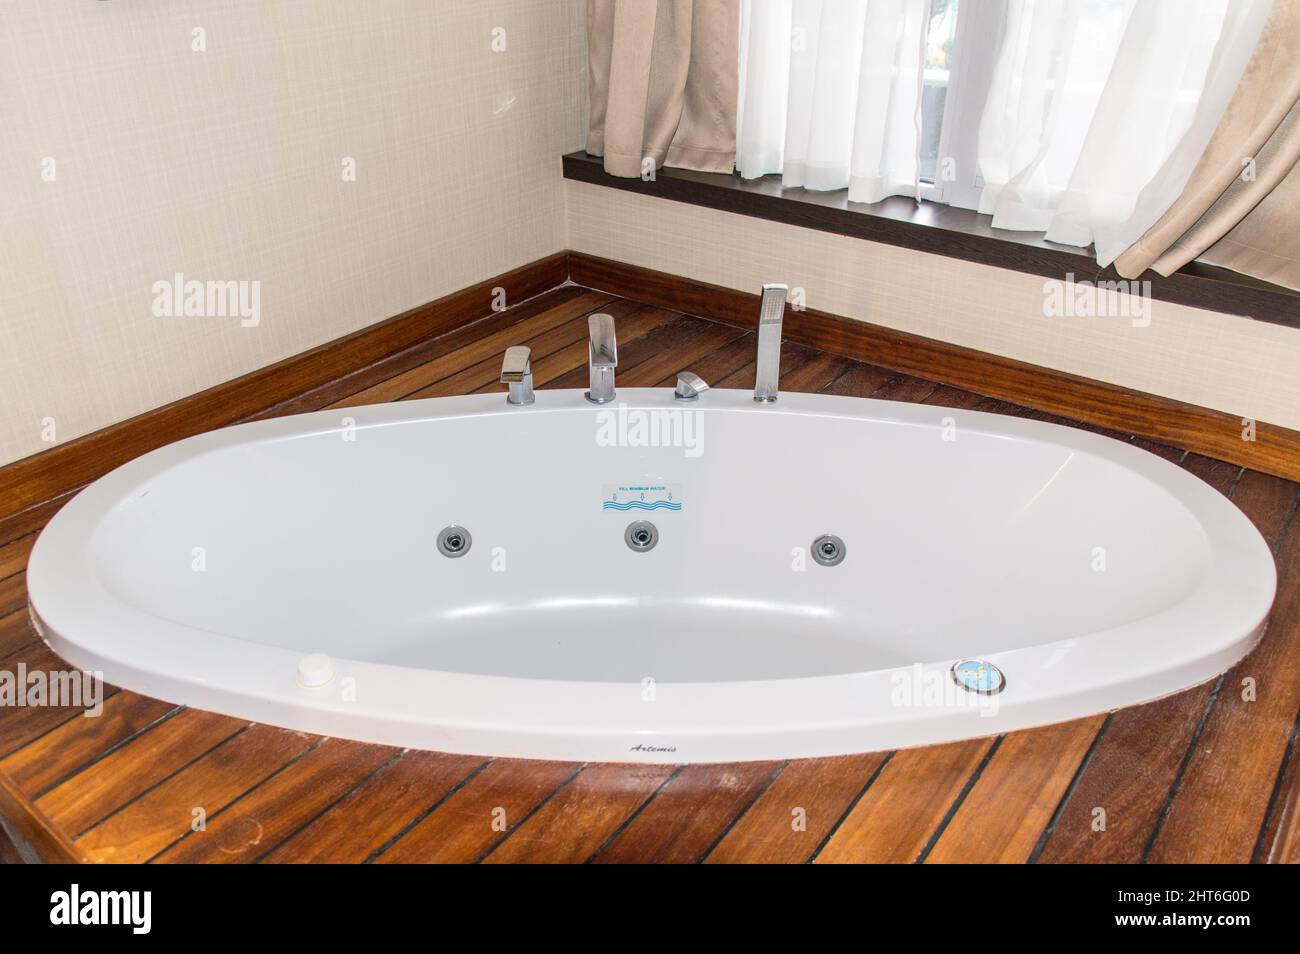 Hot tub with wooden side flooring next to a window Stock Photo